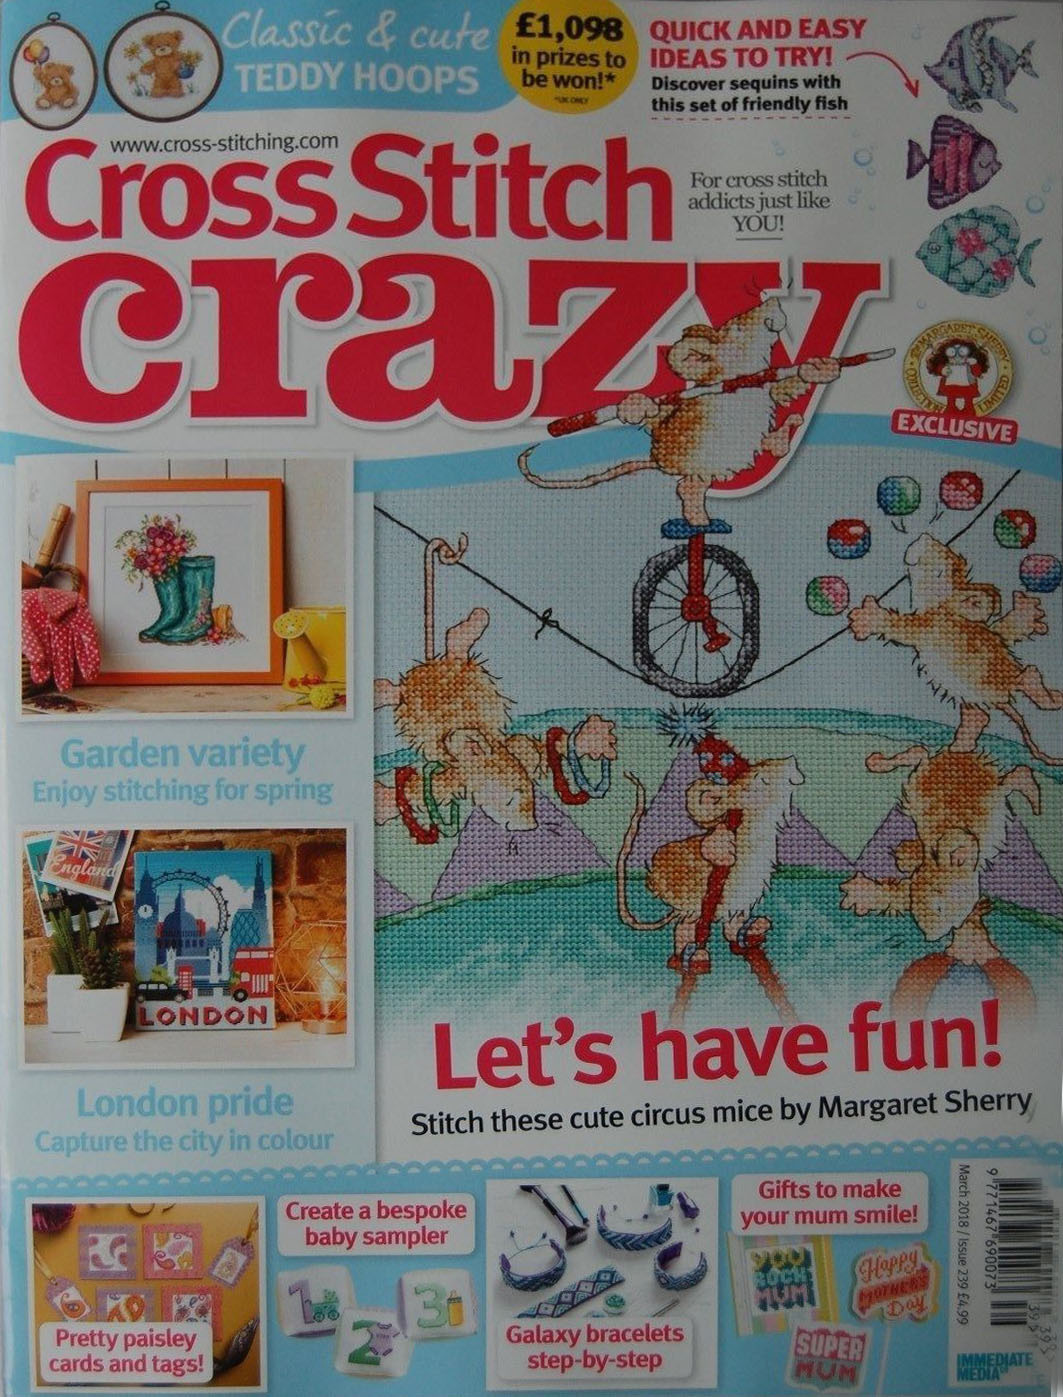 As featured in Cross Stitch Crazy magazine issue 239 on sale February/March